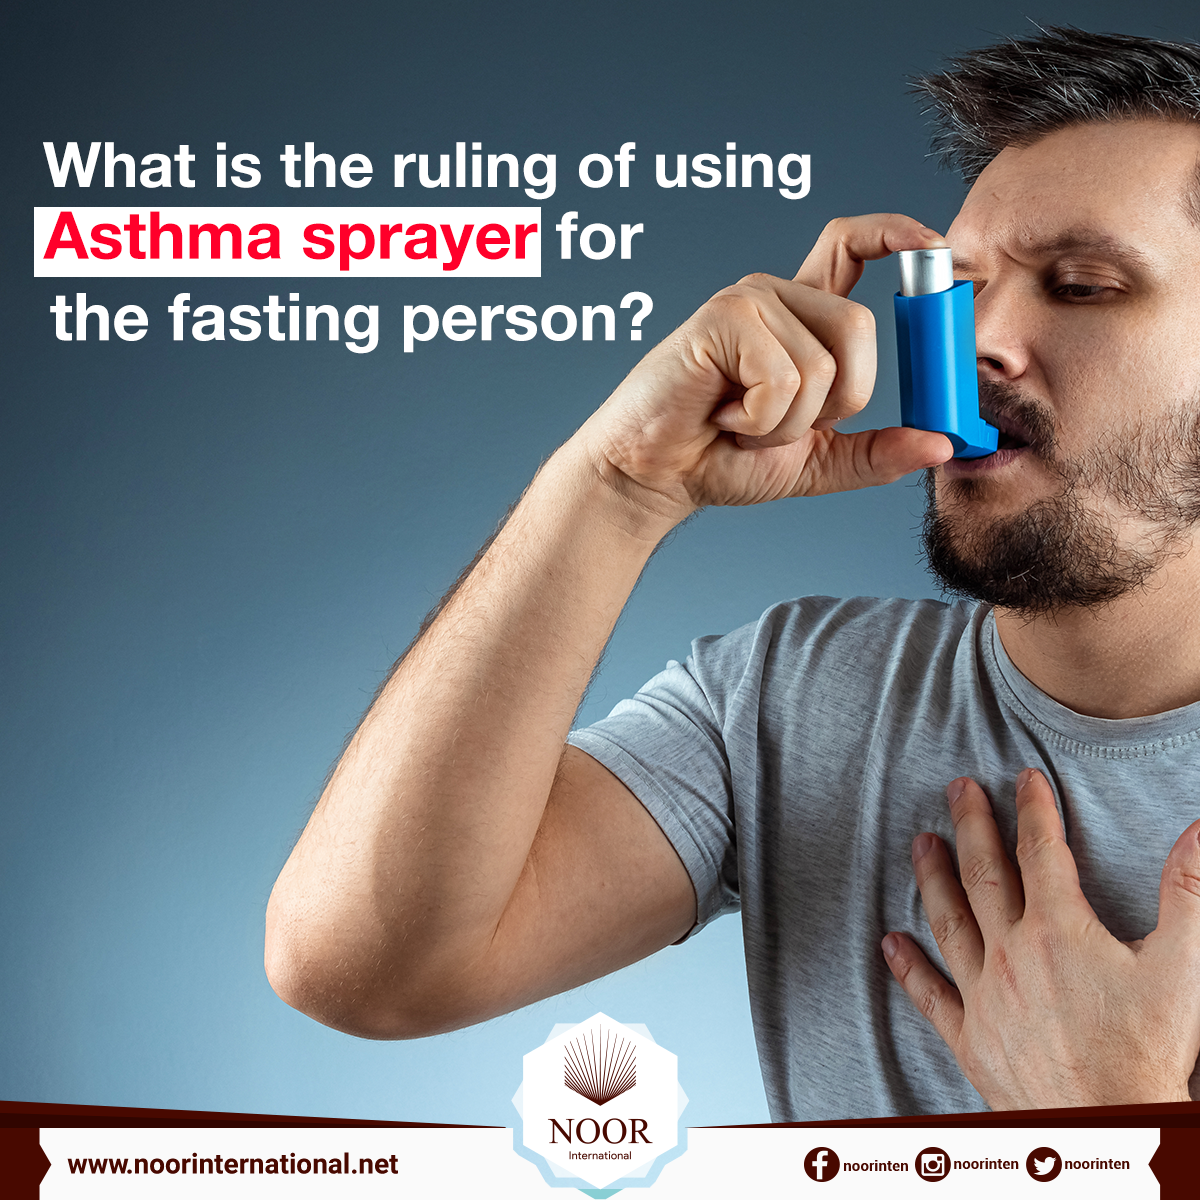 What is the ruling of using the Asthma sprayer  for the fasting person?